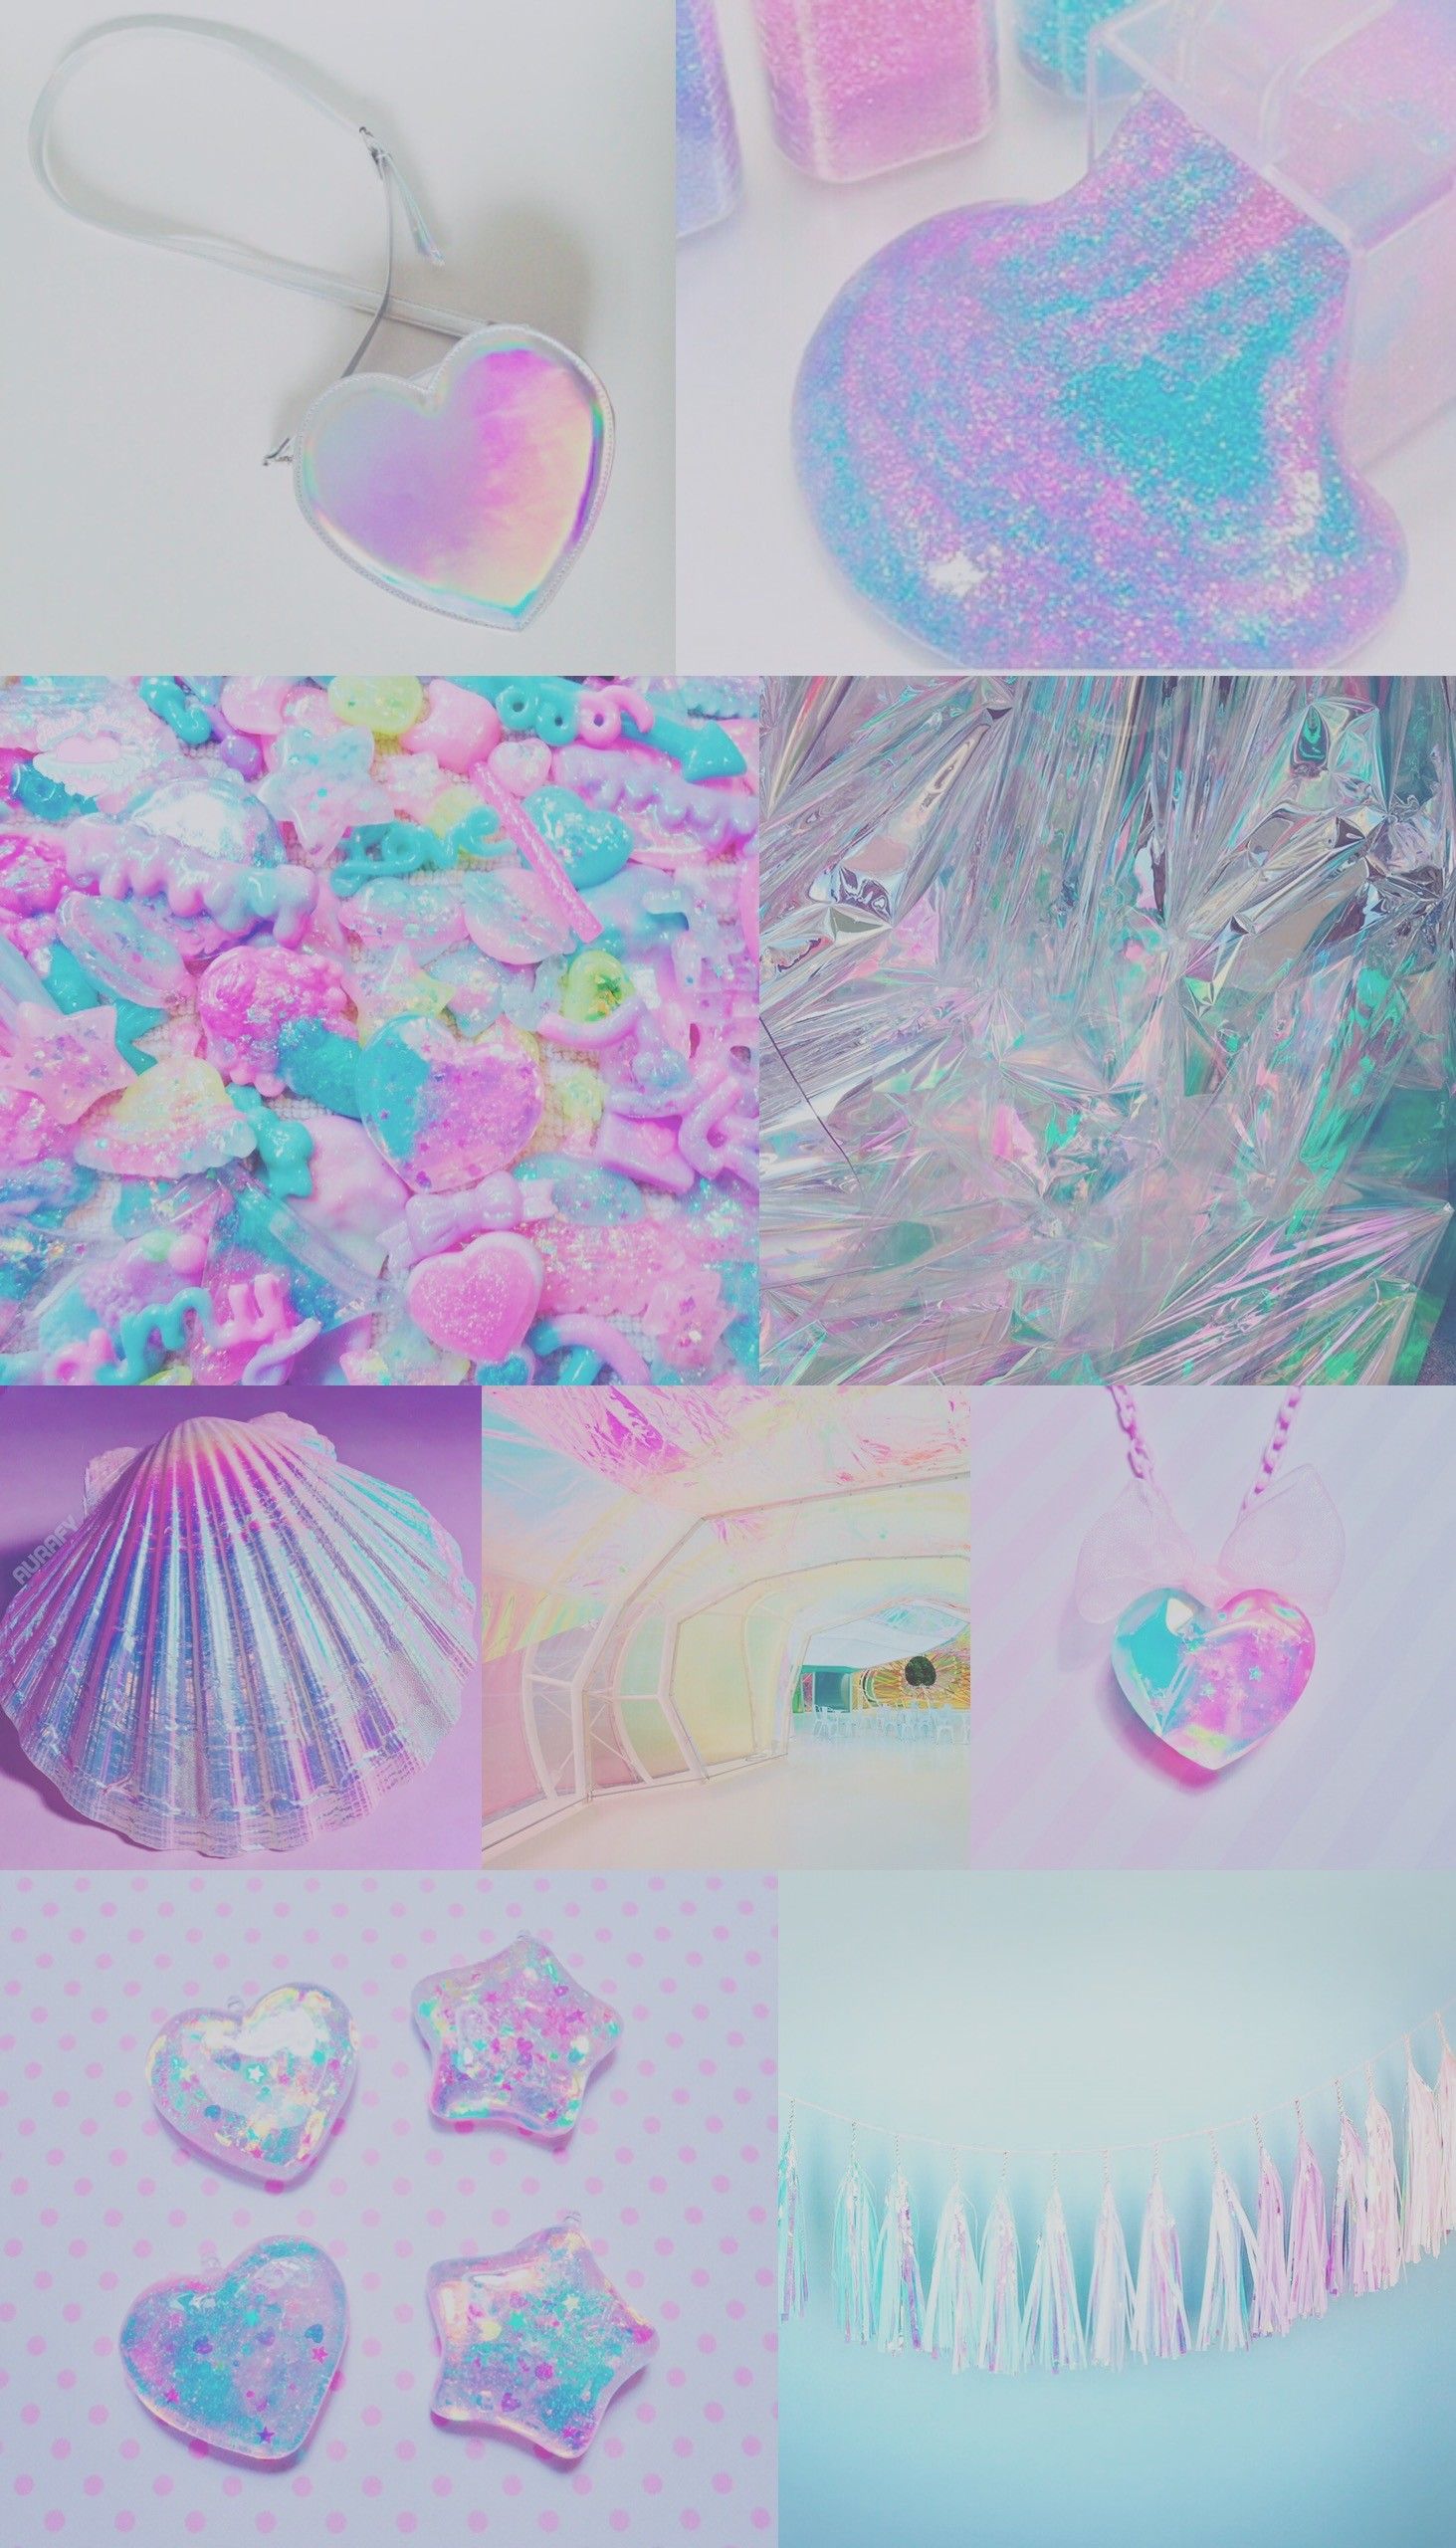 Iridescent collage wallpaper, background, iPhone, android, pretty, sparkly, pink